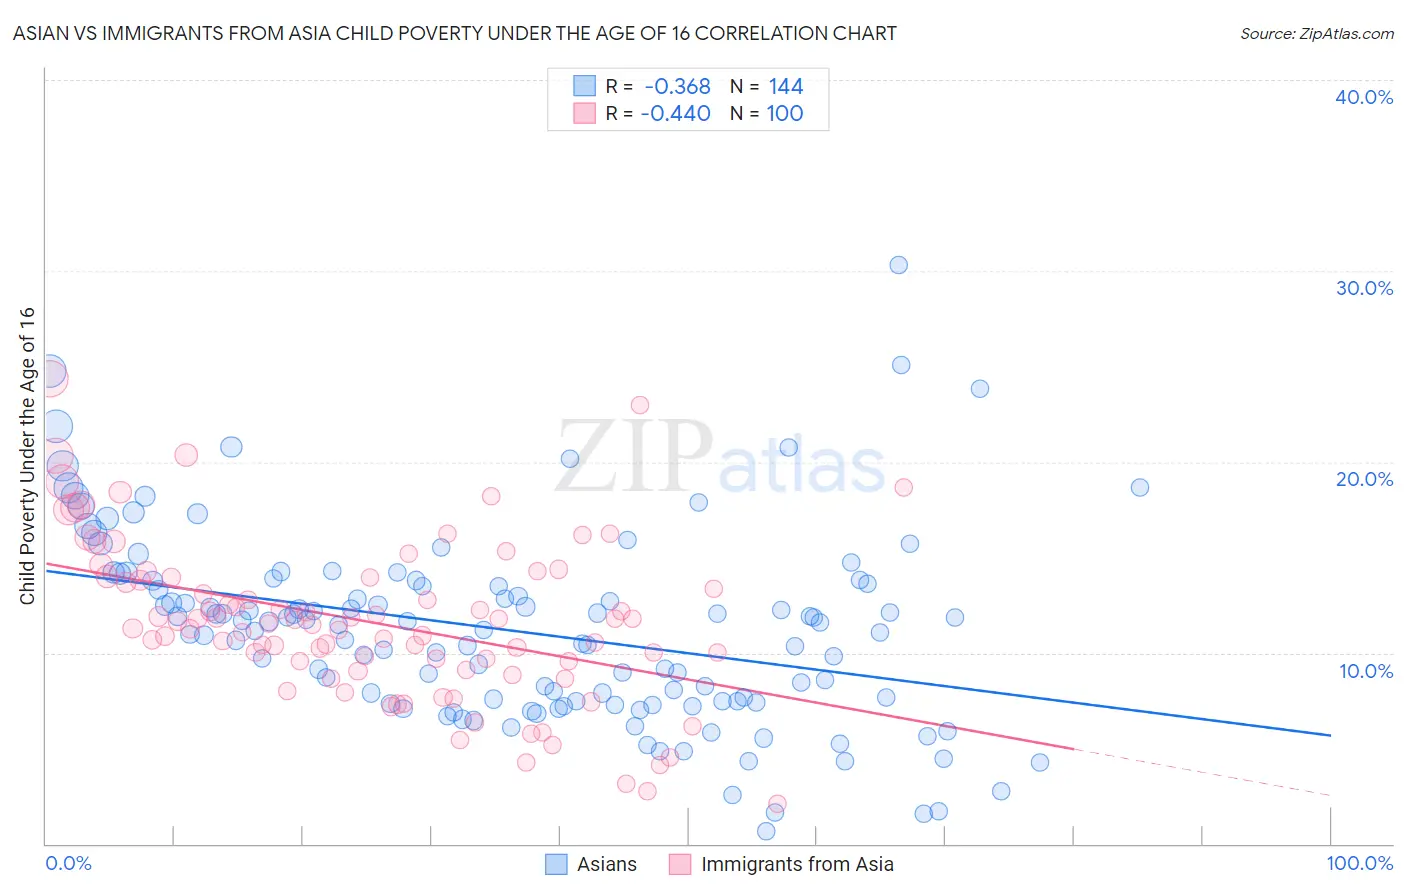 Asian vs Immigrants from Asia Child Poverty Under the Age of 16